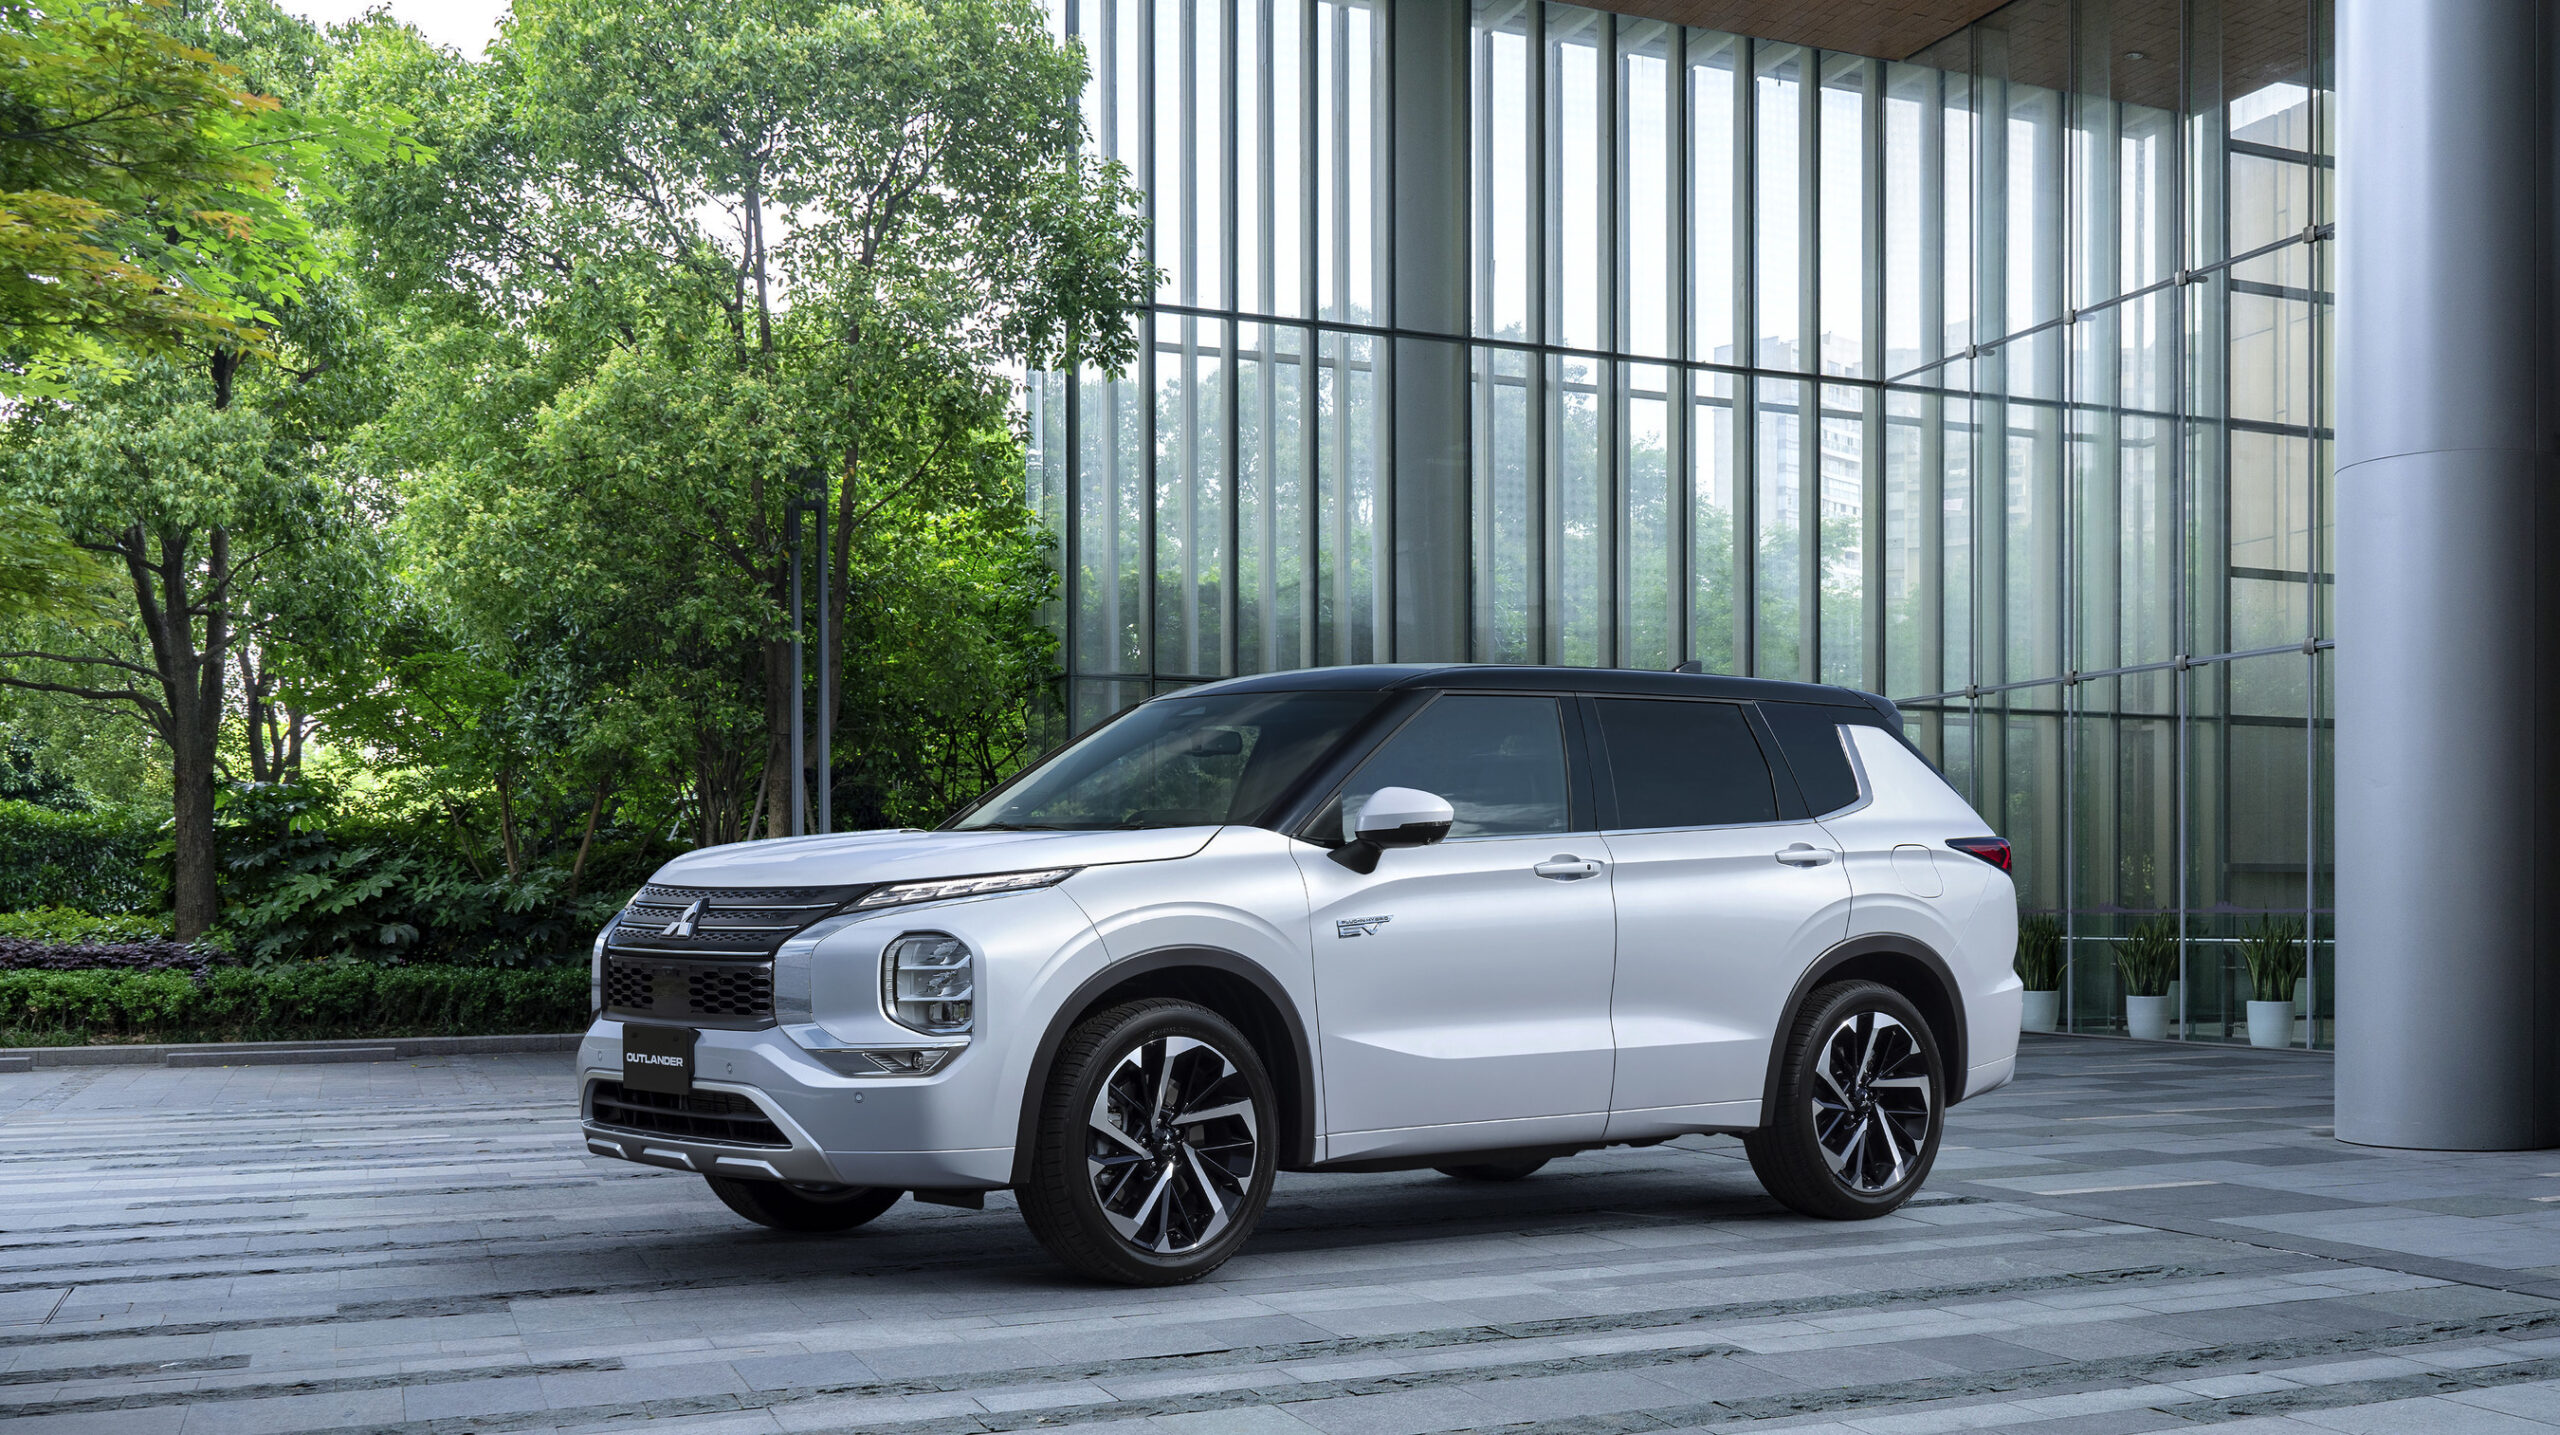 Mitsubishi Motors Launches the All-New Outlander PHEV – PHEV Model of Flagship SUV Combines Leading Electrification and All-Wheel Control Technologies